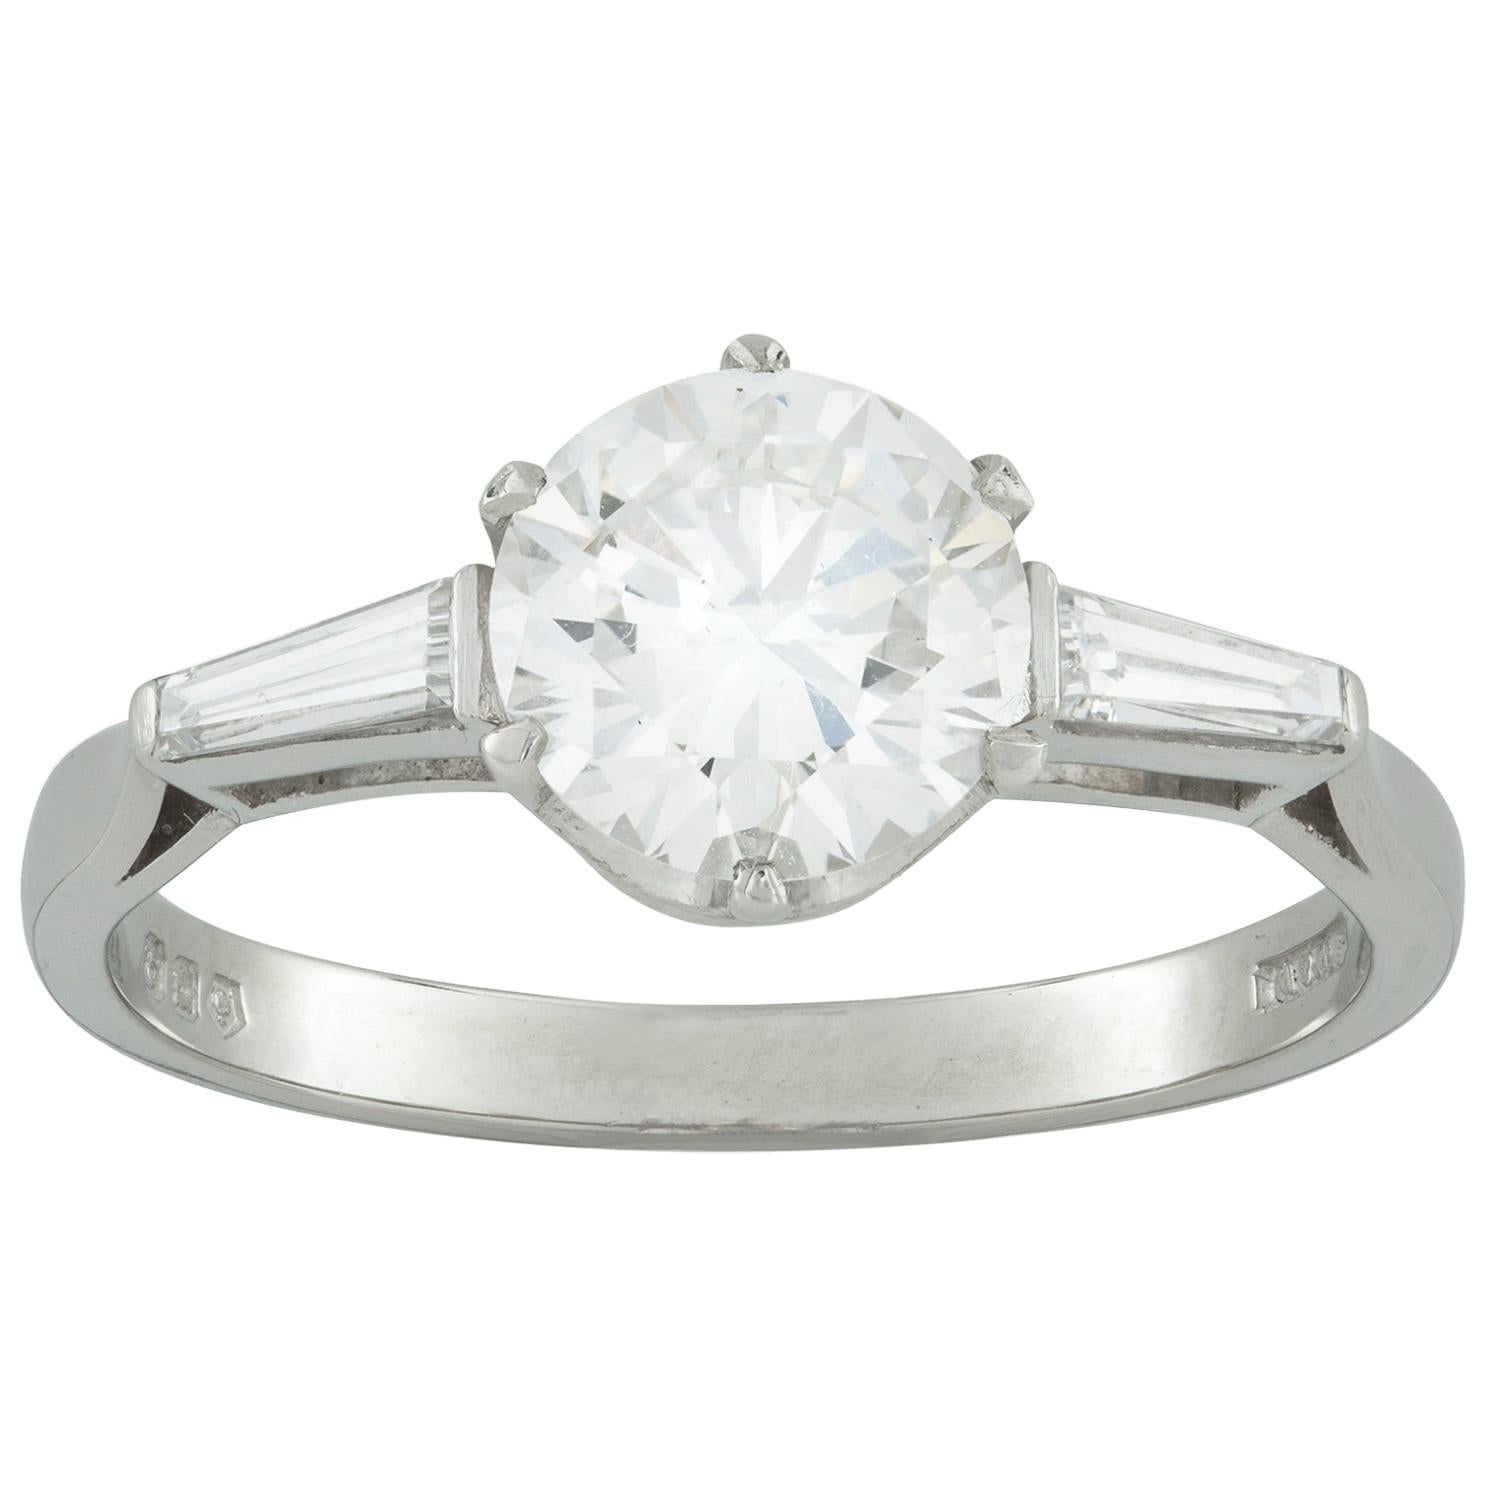 GIA Certified 1.39 Carat Solitaire Diamond Ring